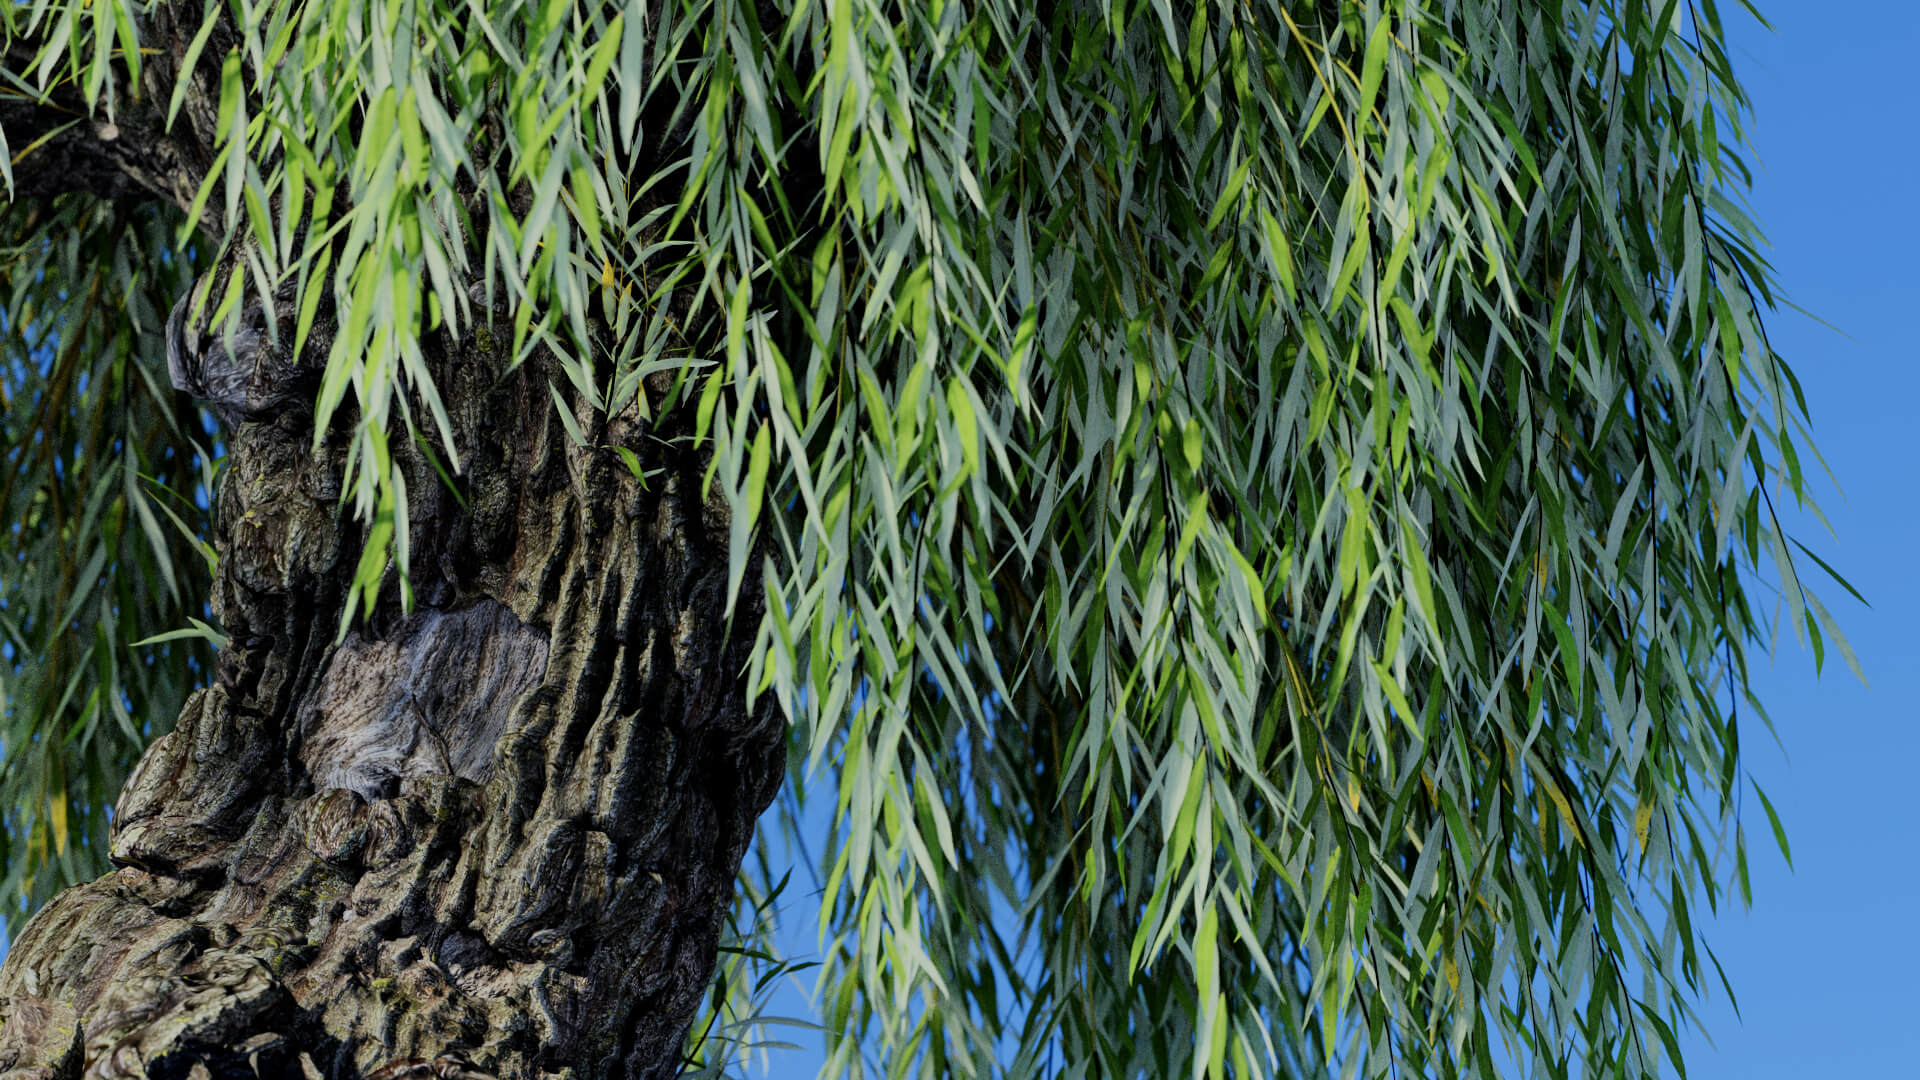 3D model of the Weeping willow pollarded Salix babylonica pollarded close-up